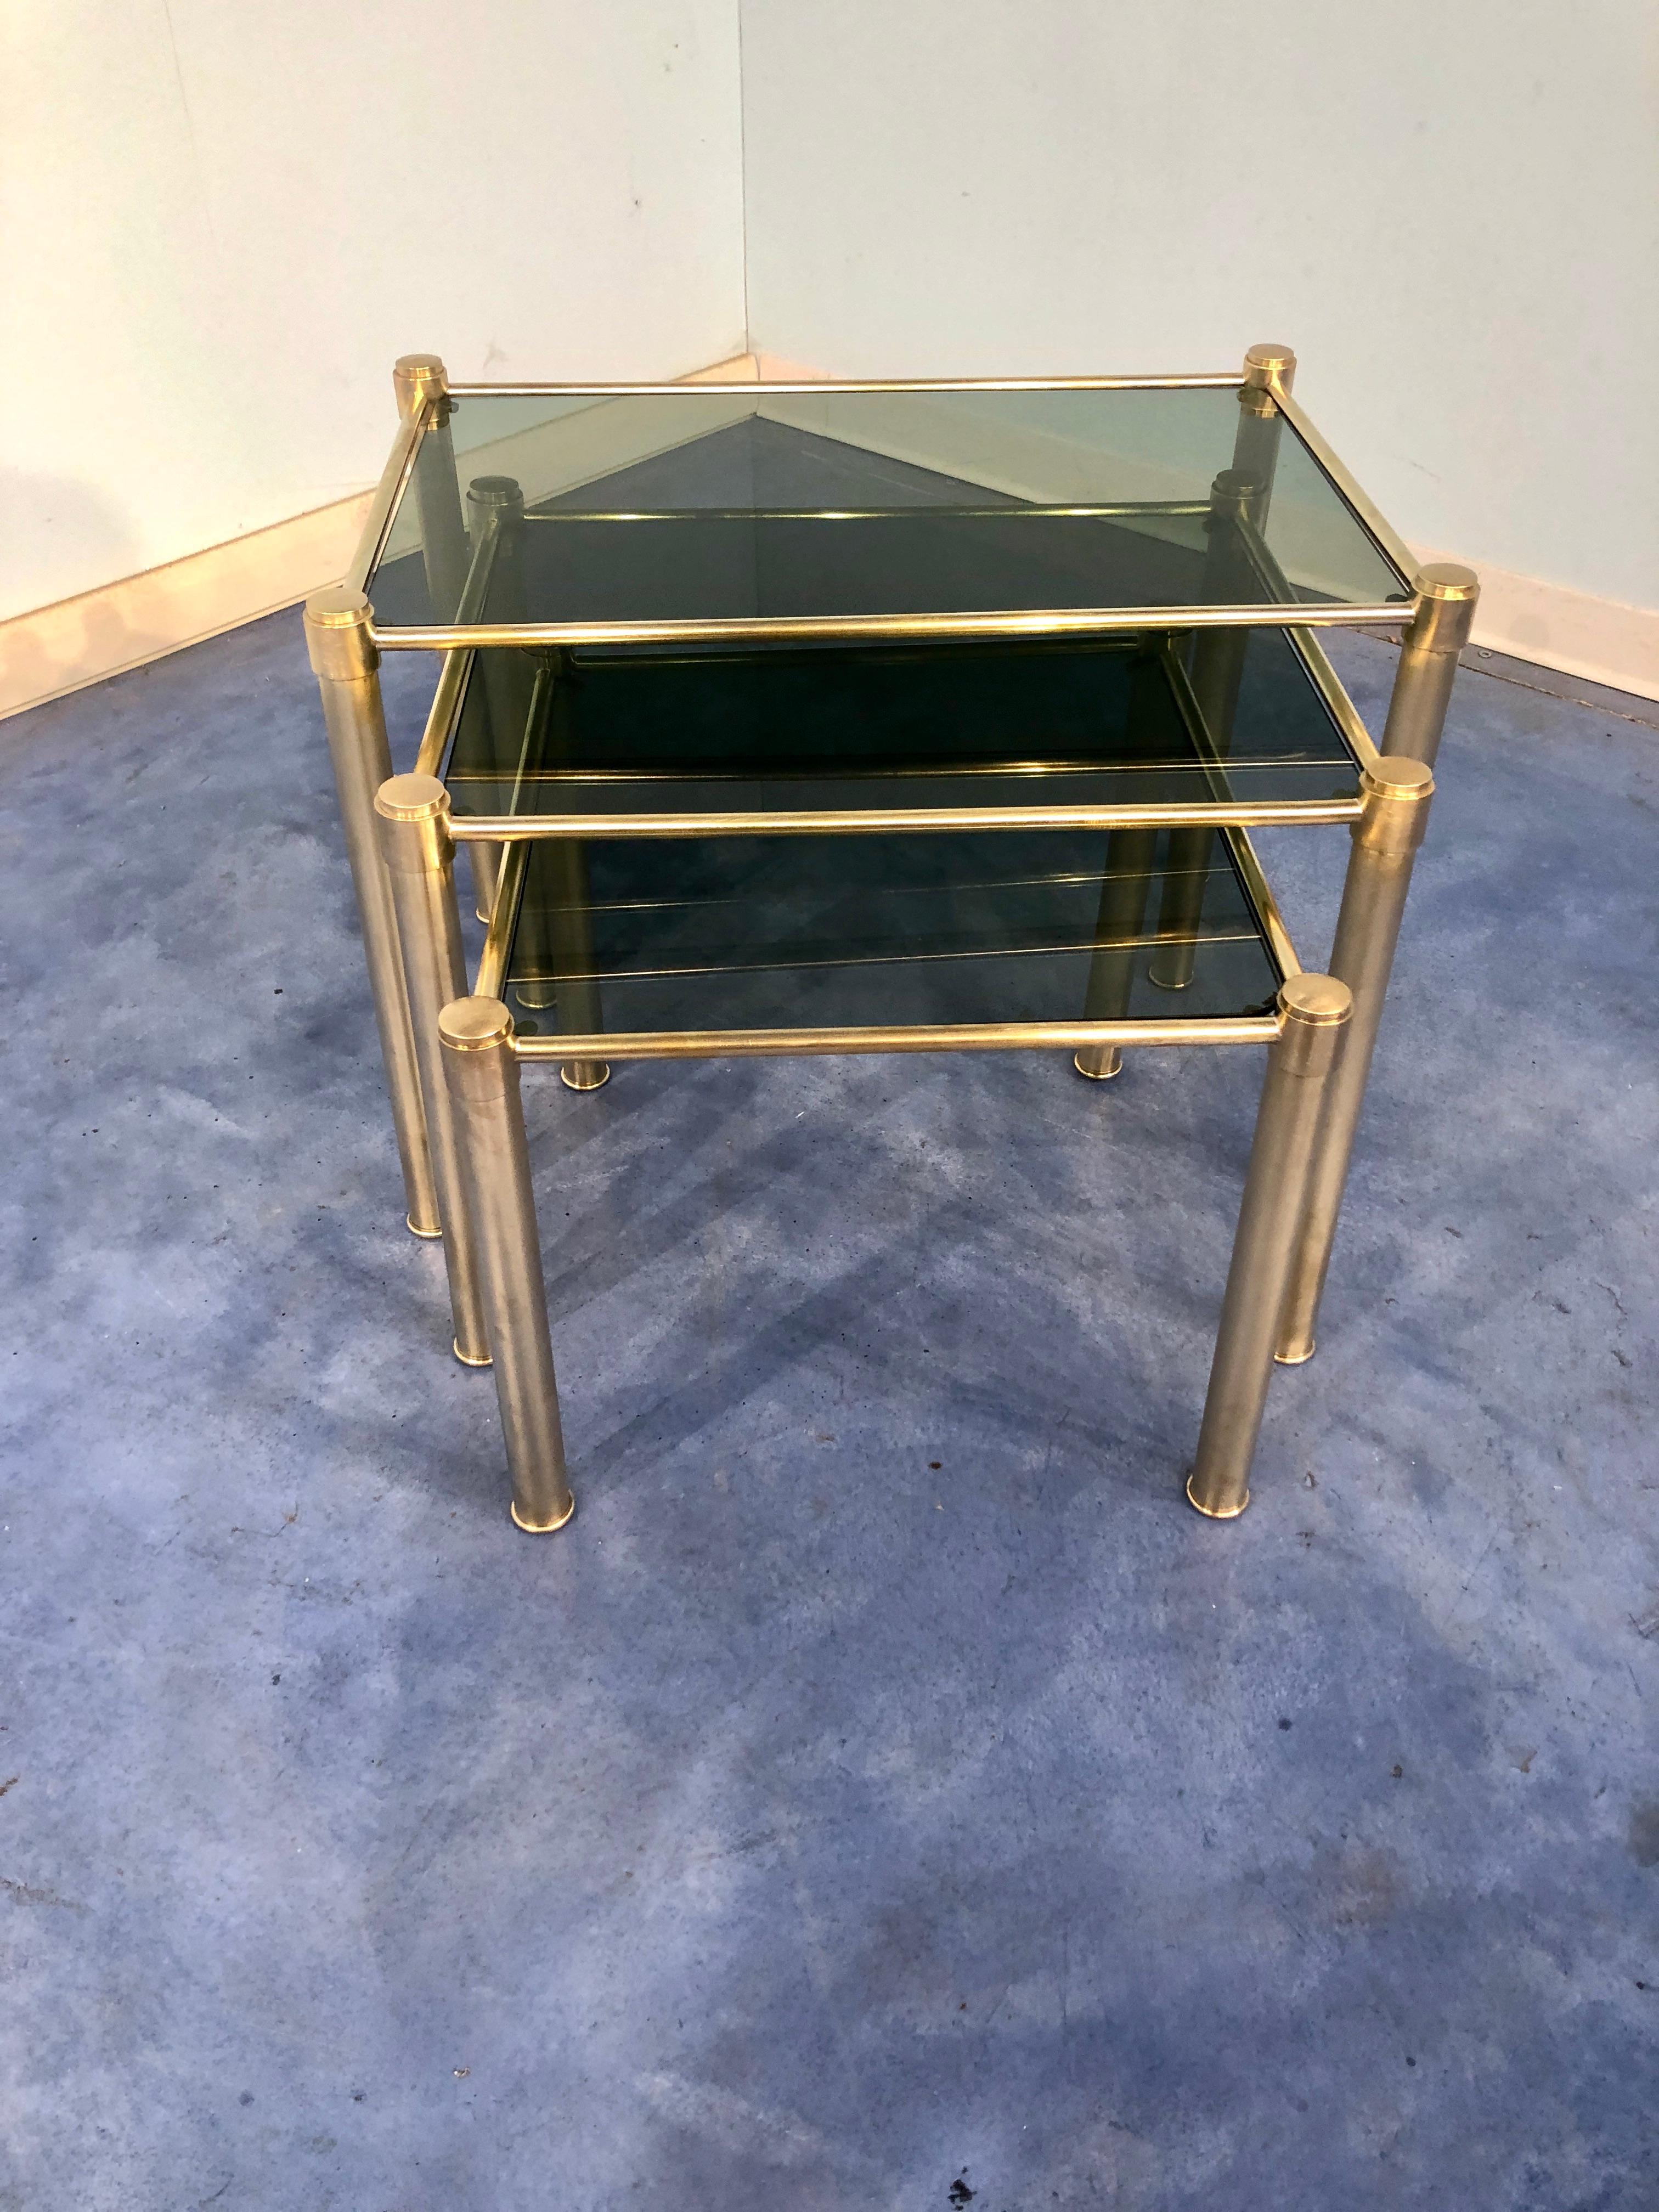 Italian Mid-Century Modern Brass and Smoked Glass Nesting Tables, 1970s For Sale 3